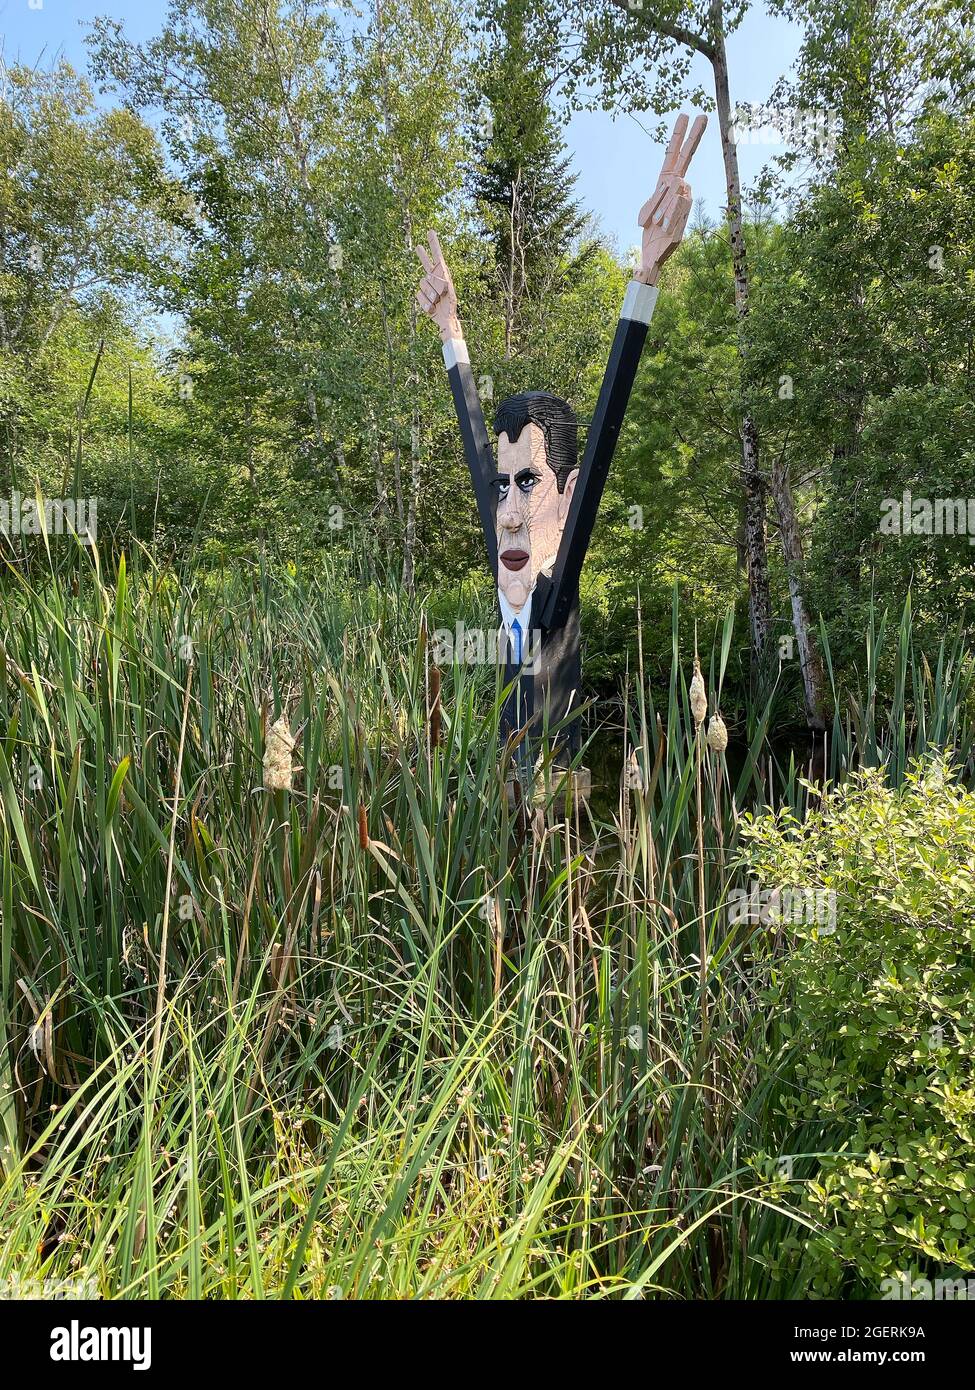 This sculpture, titled Richard Nixon, was done by American artist Bernard Langlais and is housed at the Langlais Sculpture Preserve in Cushing, Maine. Bernard Langlais (1921 - 1977) was a Maine native and maintained a studio in Cushing, Maine until his death at the age of 56. He developed his artistic interest at the Corcoran School of Art in Washington DC and the Skowhegan School of Painting and Sculpture. Stock Photo